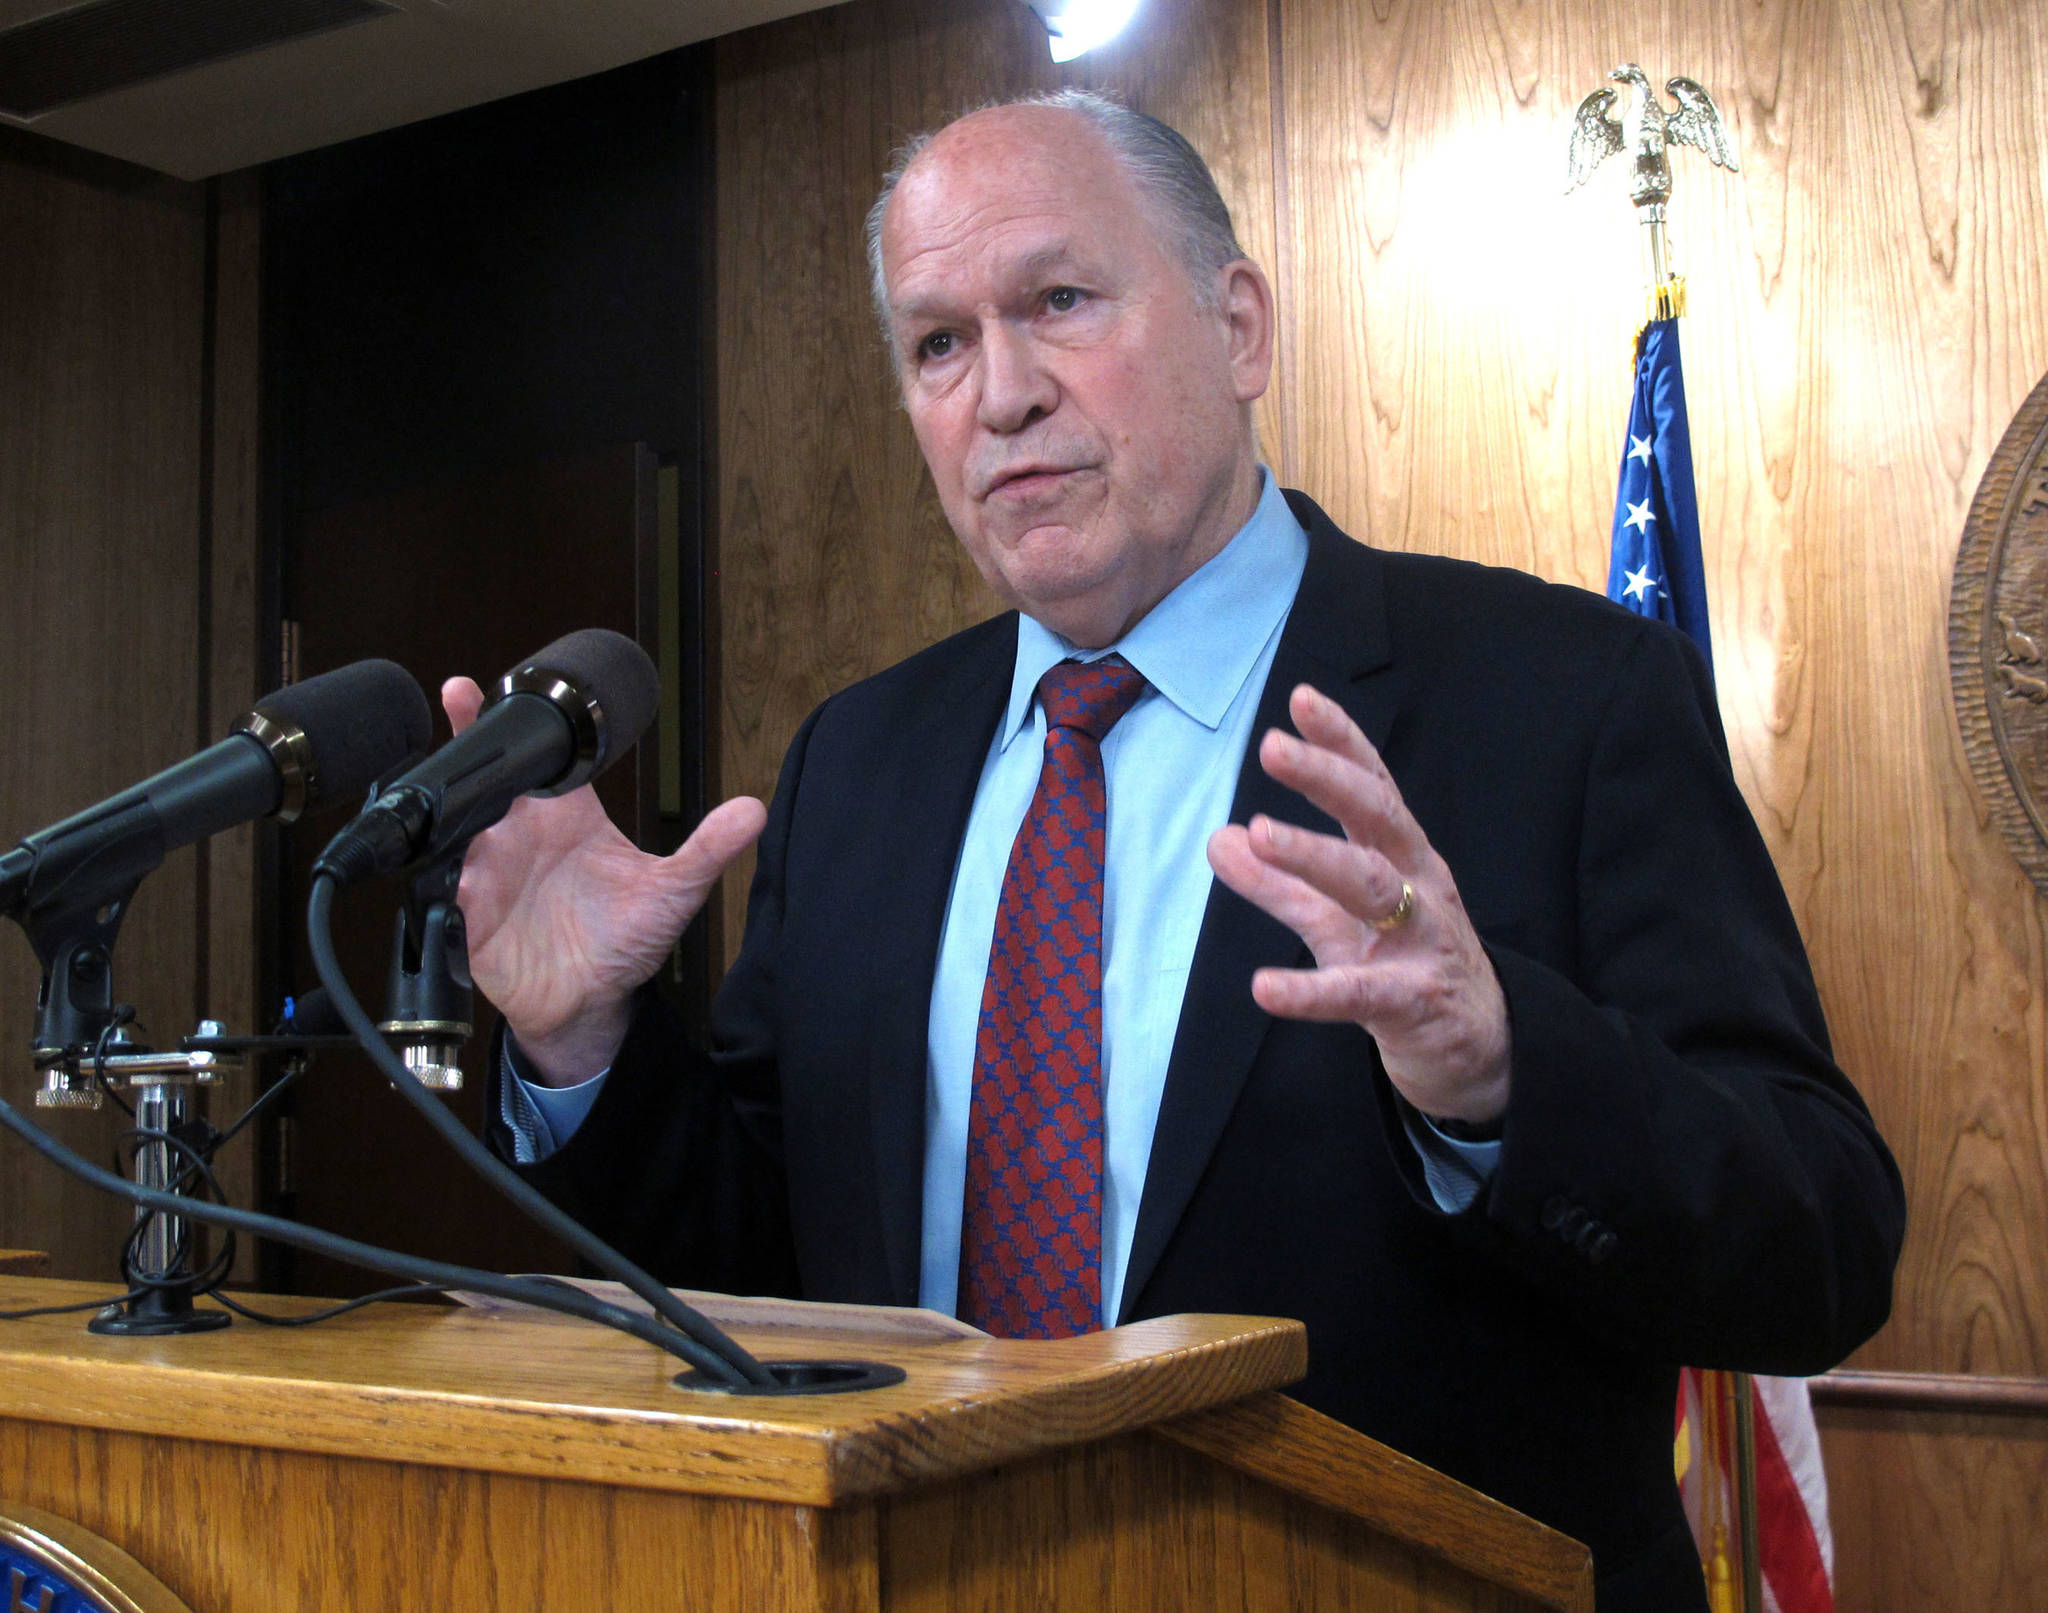 Alaska Gov. Bill Walker gestures during a news conference on Thursday, May 18, 2017, in Juneau, Alaska. Thursday marked the first day of a special session called by Walker to address the budget and a fiscal plan for the state. (AP Photo/Becky Bohrer)